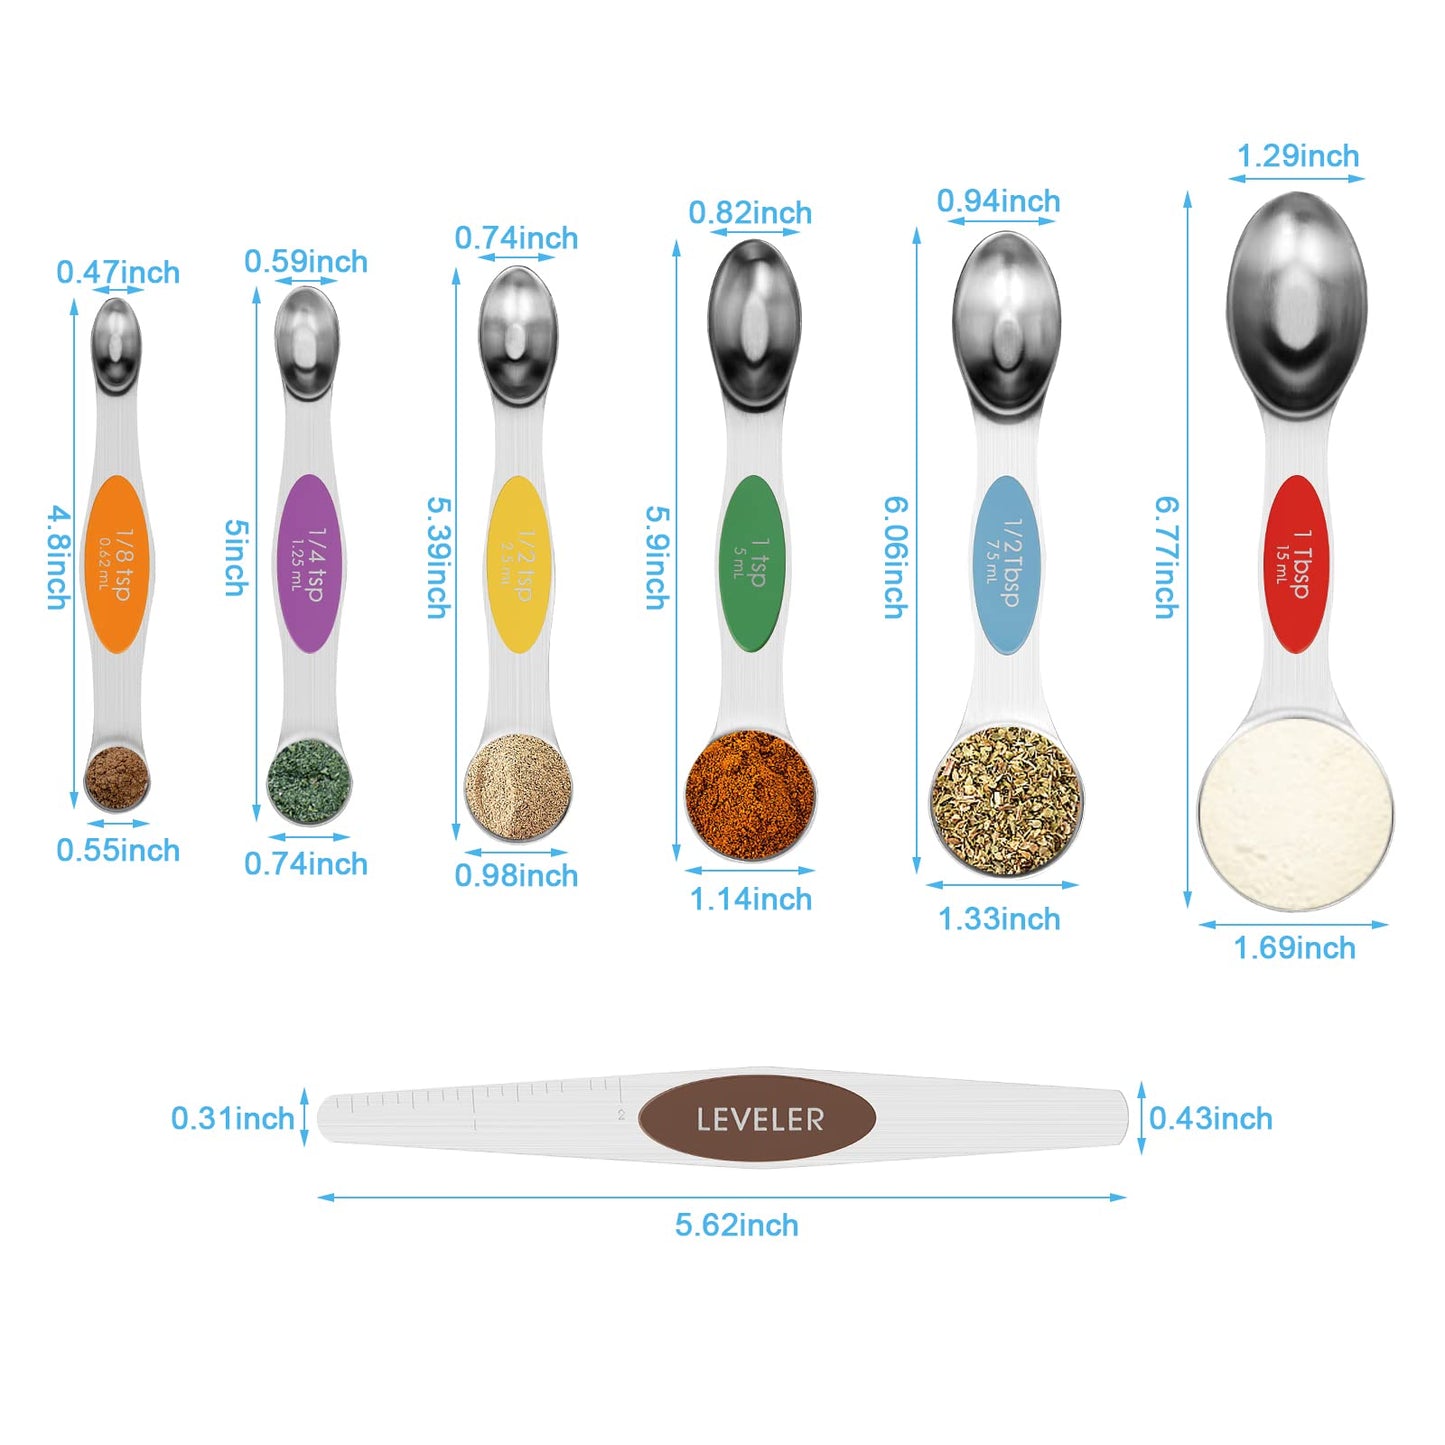 Aovchei 7 PCS Magnetic Measuring Spoons Set, Dual Sided, Stainless Steel Small Tablespoon, Teaspoons, Fits in Spice Jars, for Dry and Liquid, MultiColor